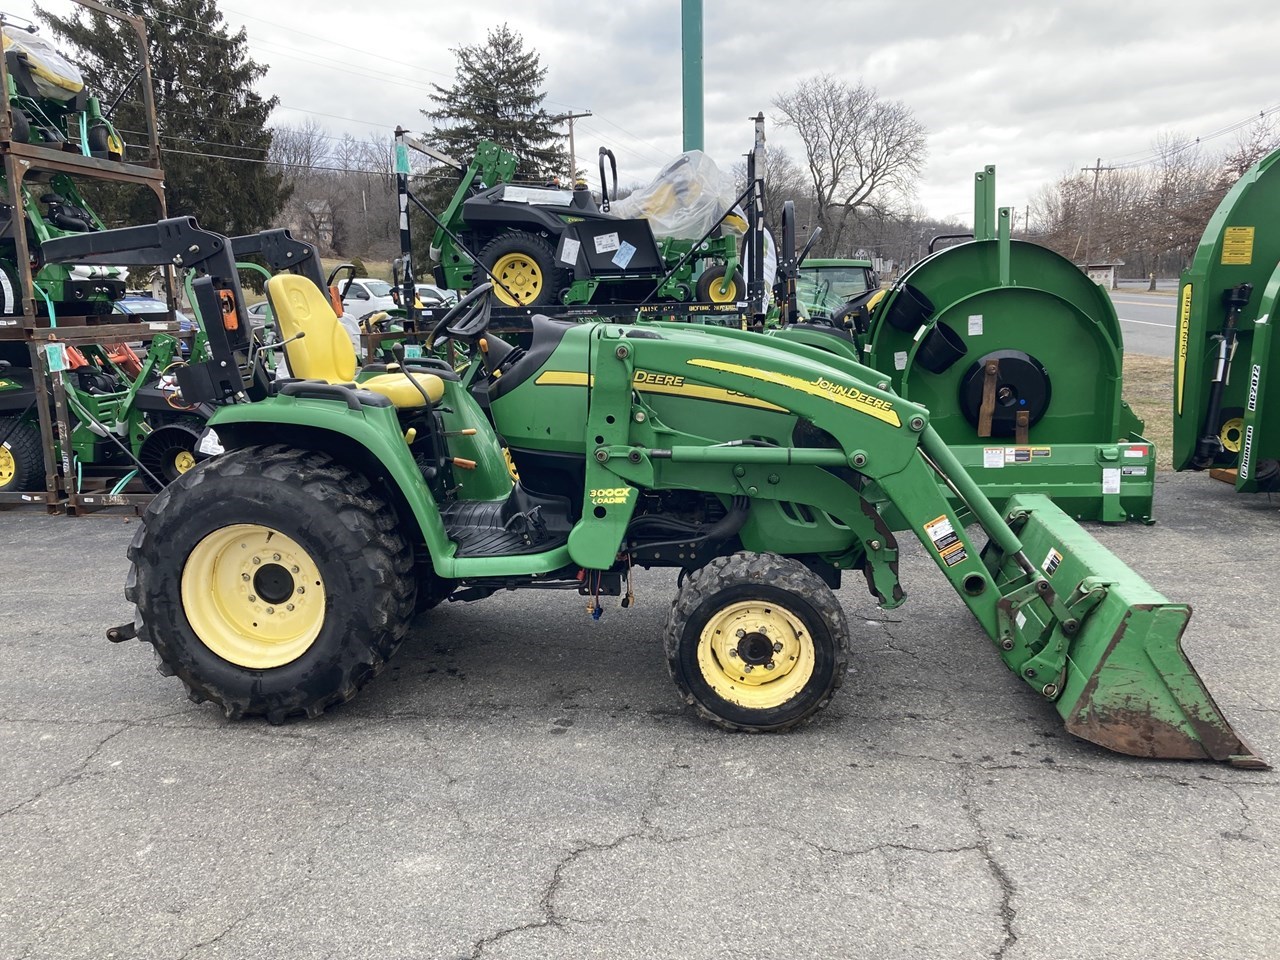 2008 John Deere 3320 Tractor - Compact Utility For Sale